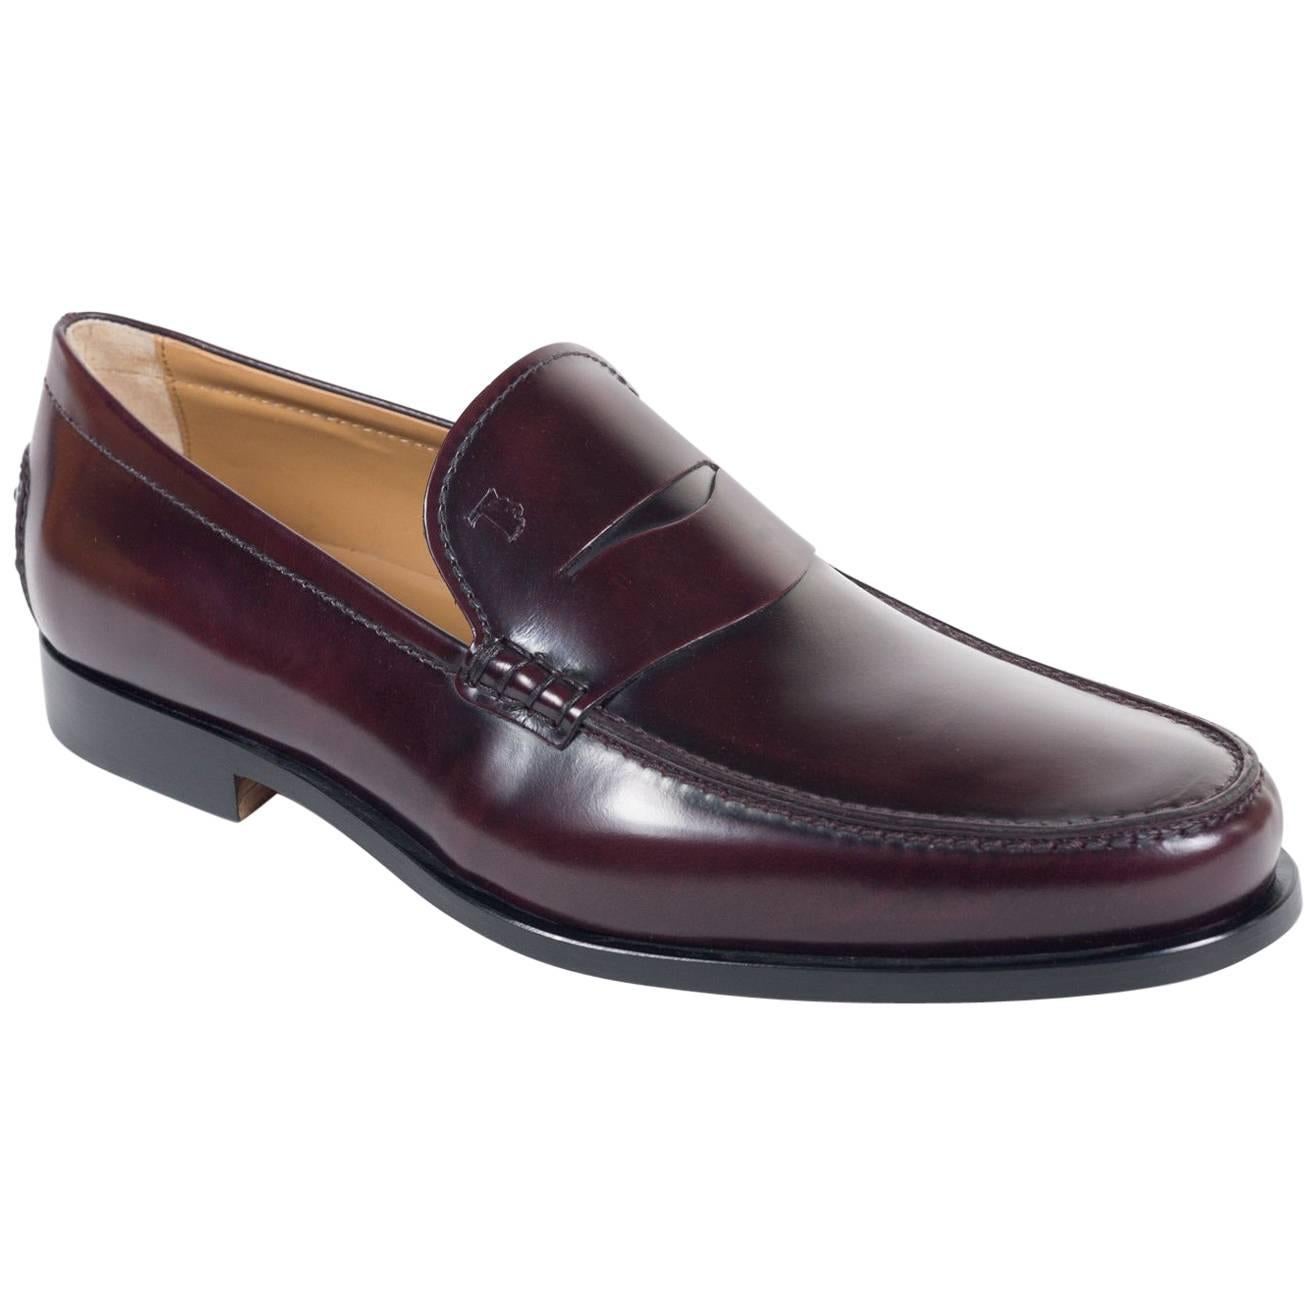 Tod's Men's Classic Burgundy Leather Penny Loafers